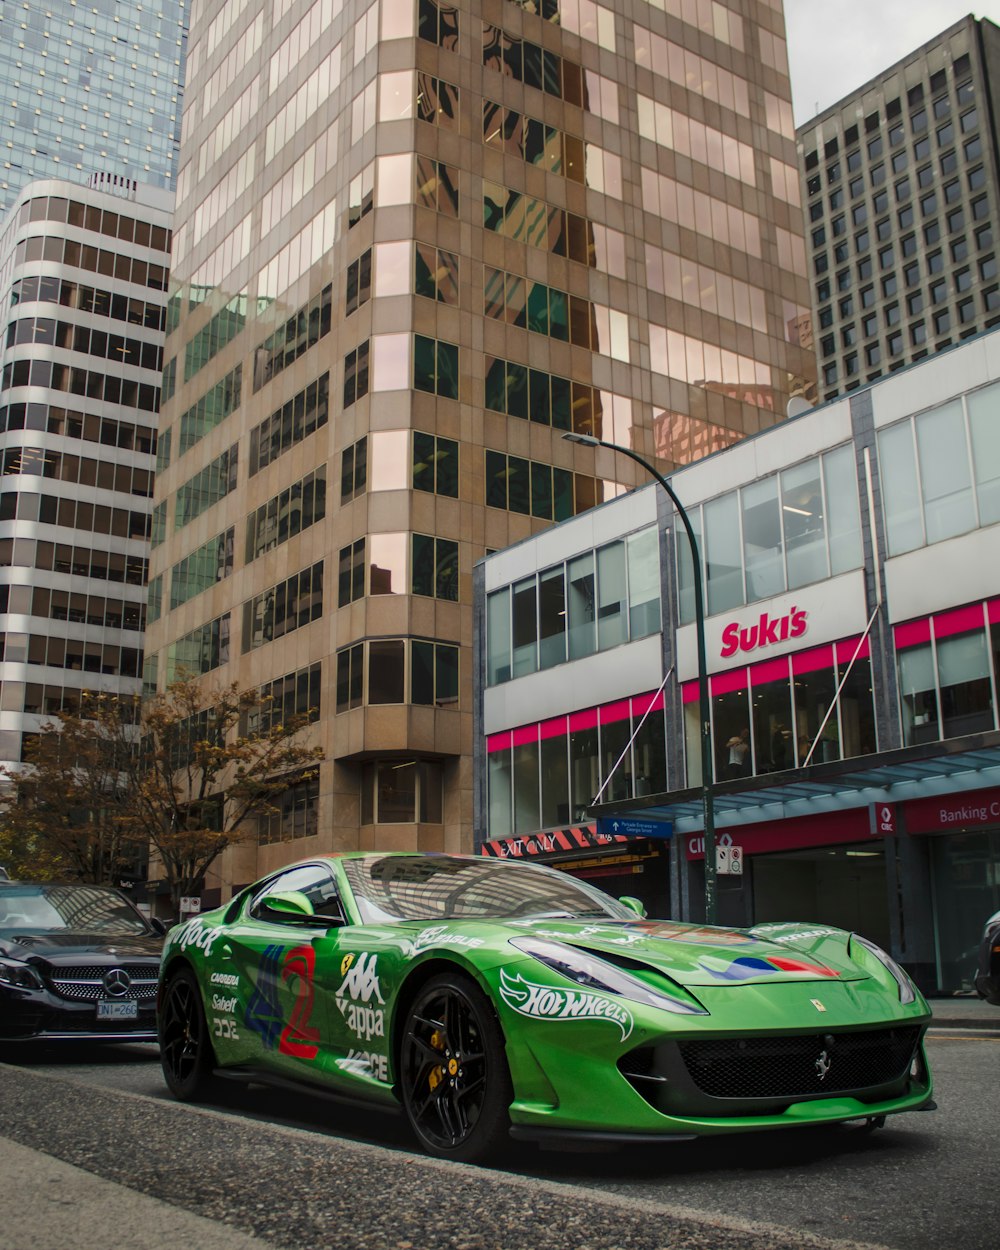 a green sports car parked in front of a tall building